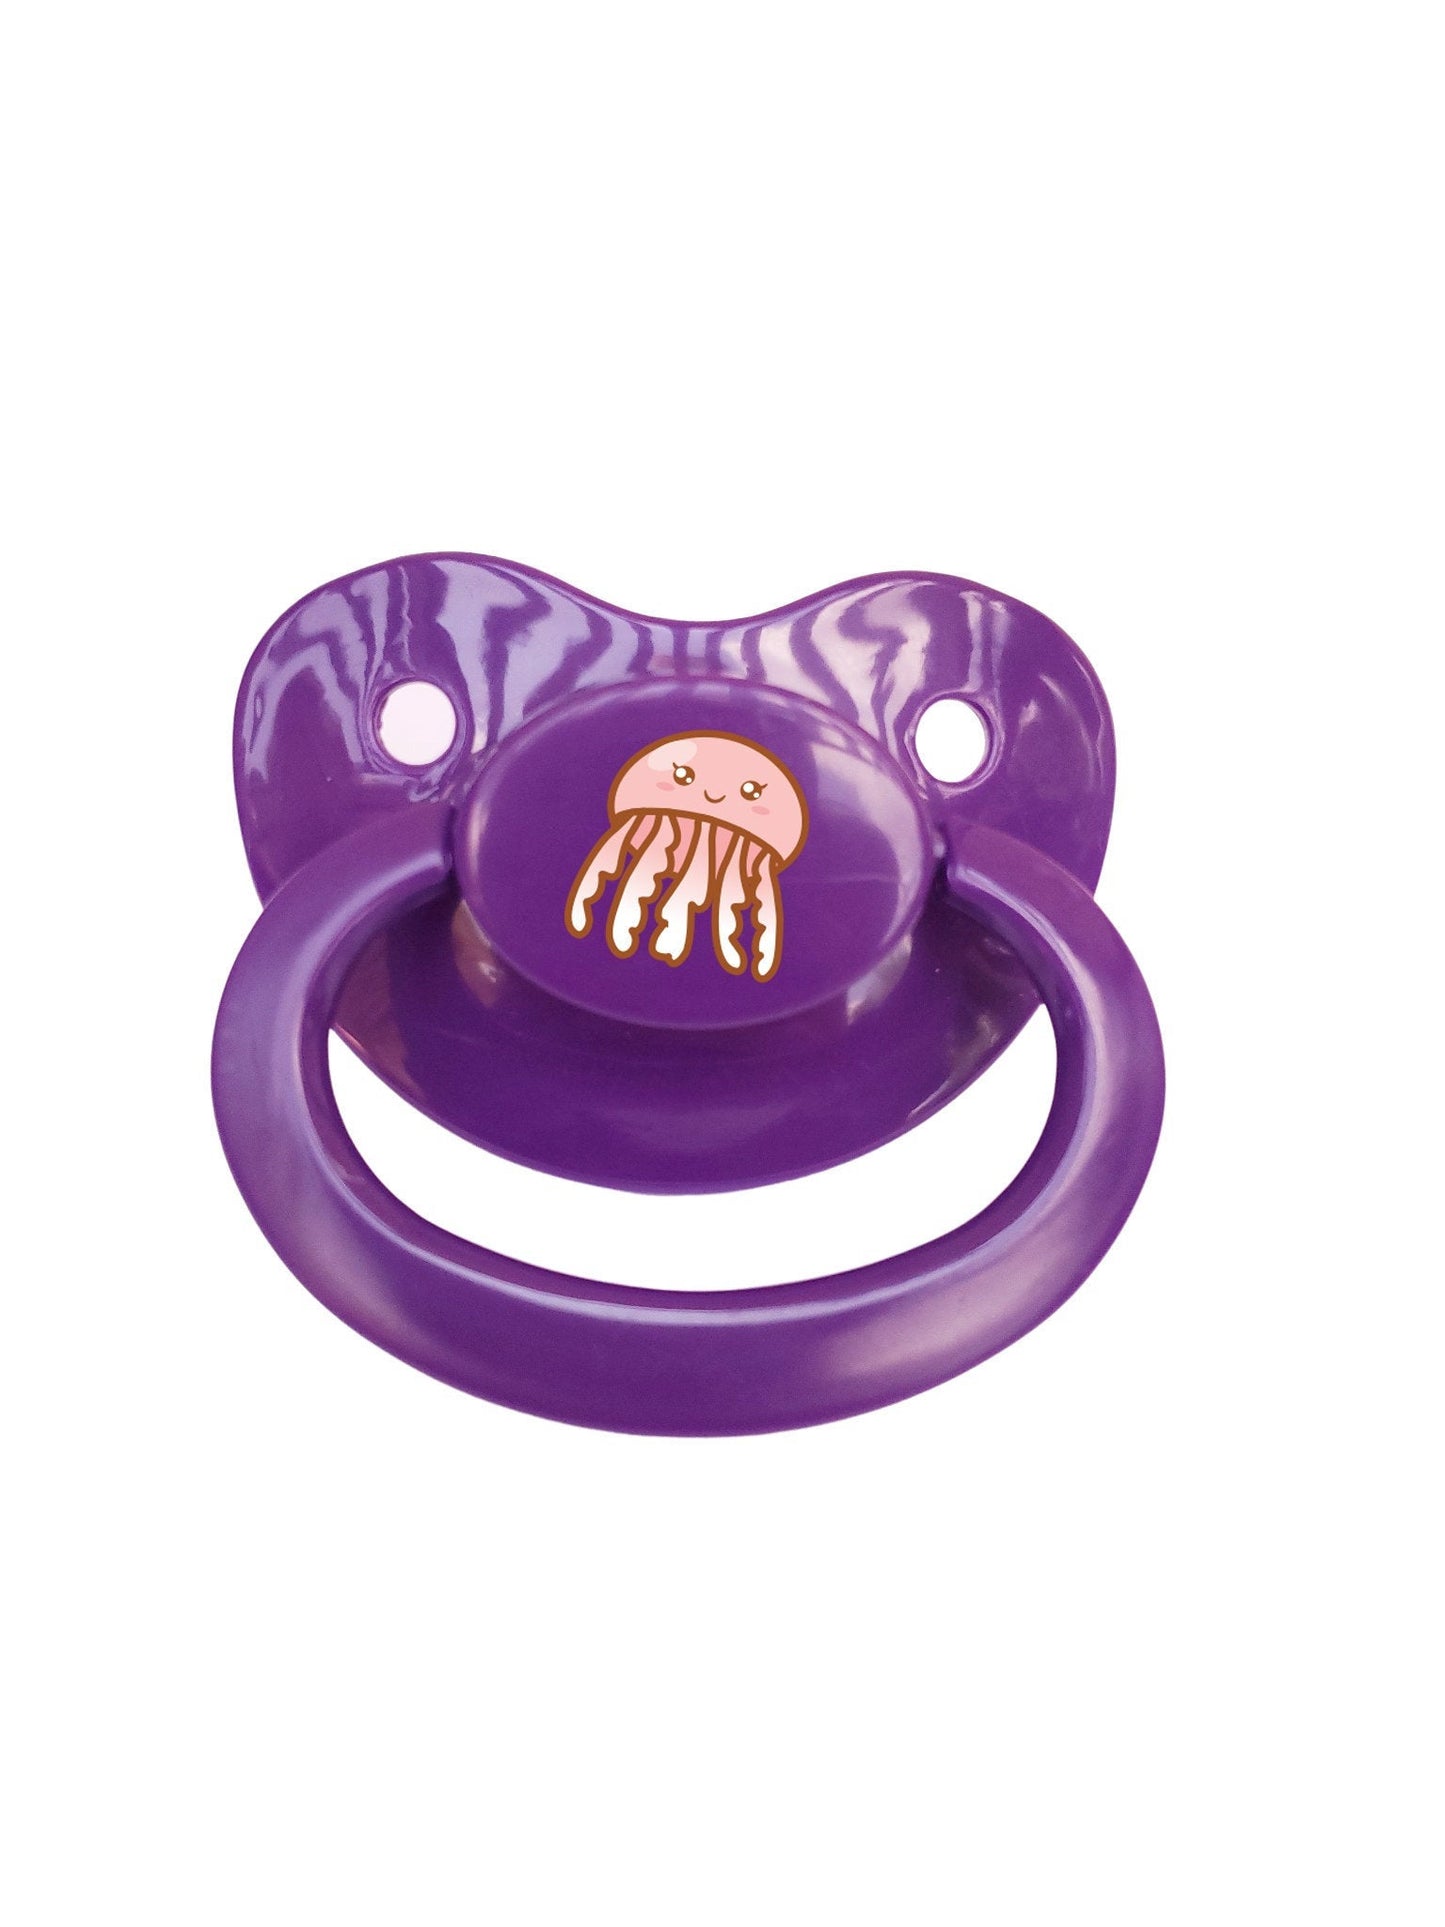 Jellyfish Adult Pacifier